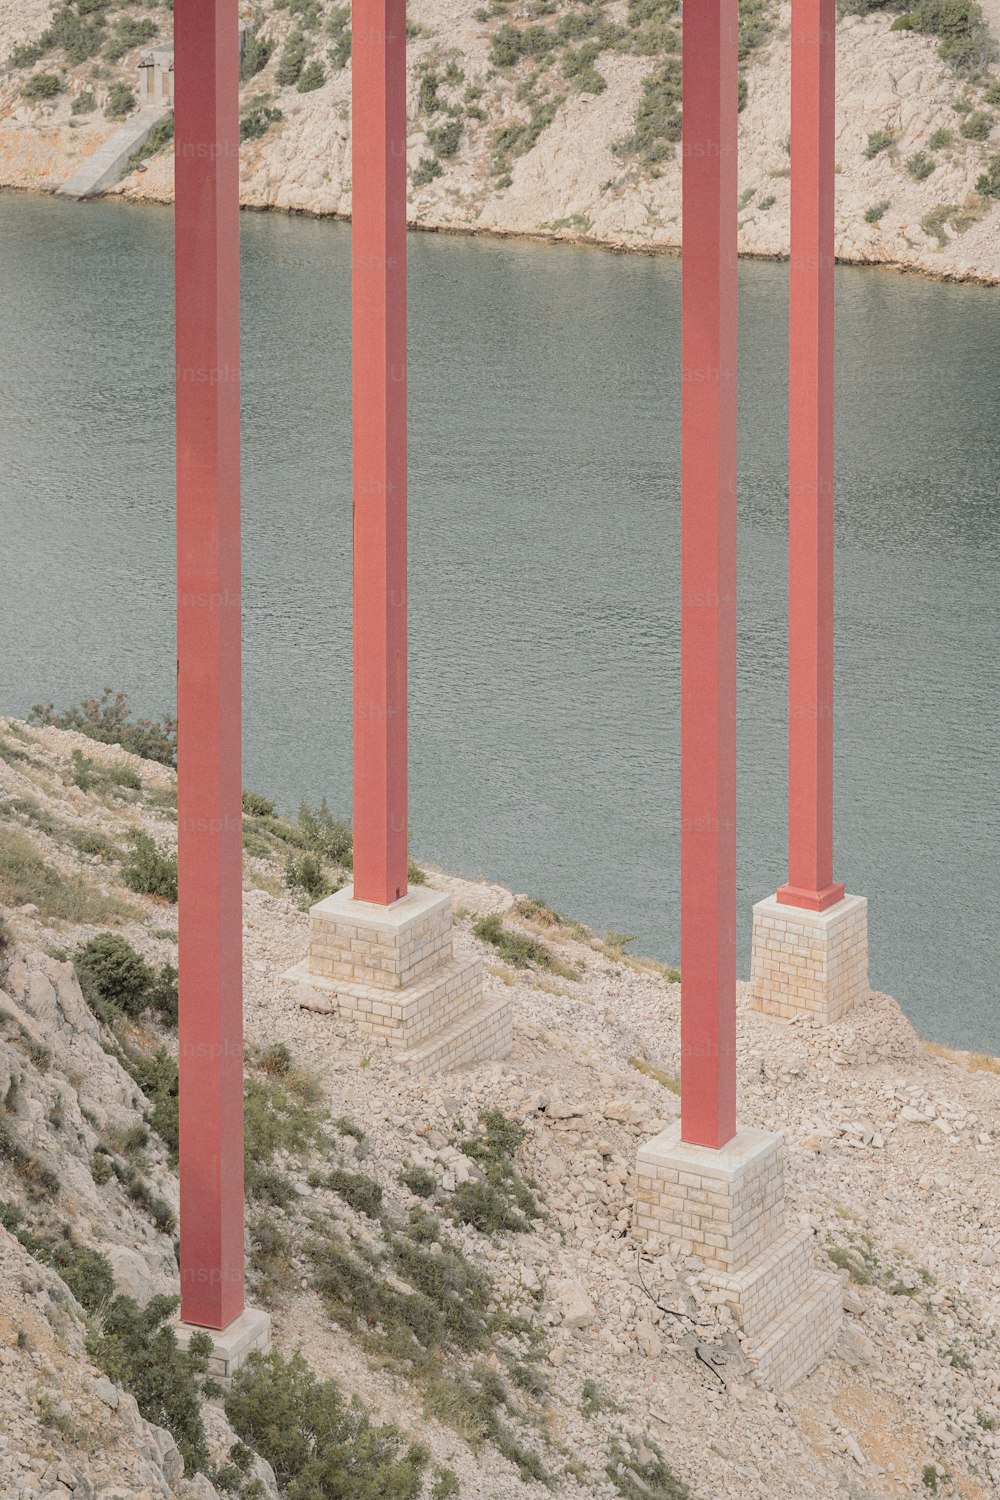 a row of red pillars next to a body of water